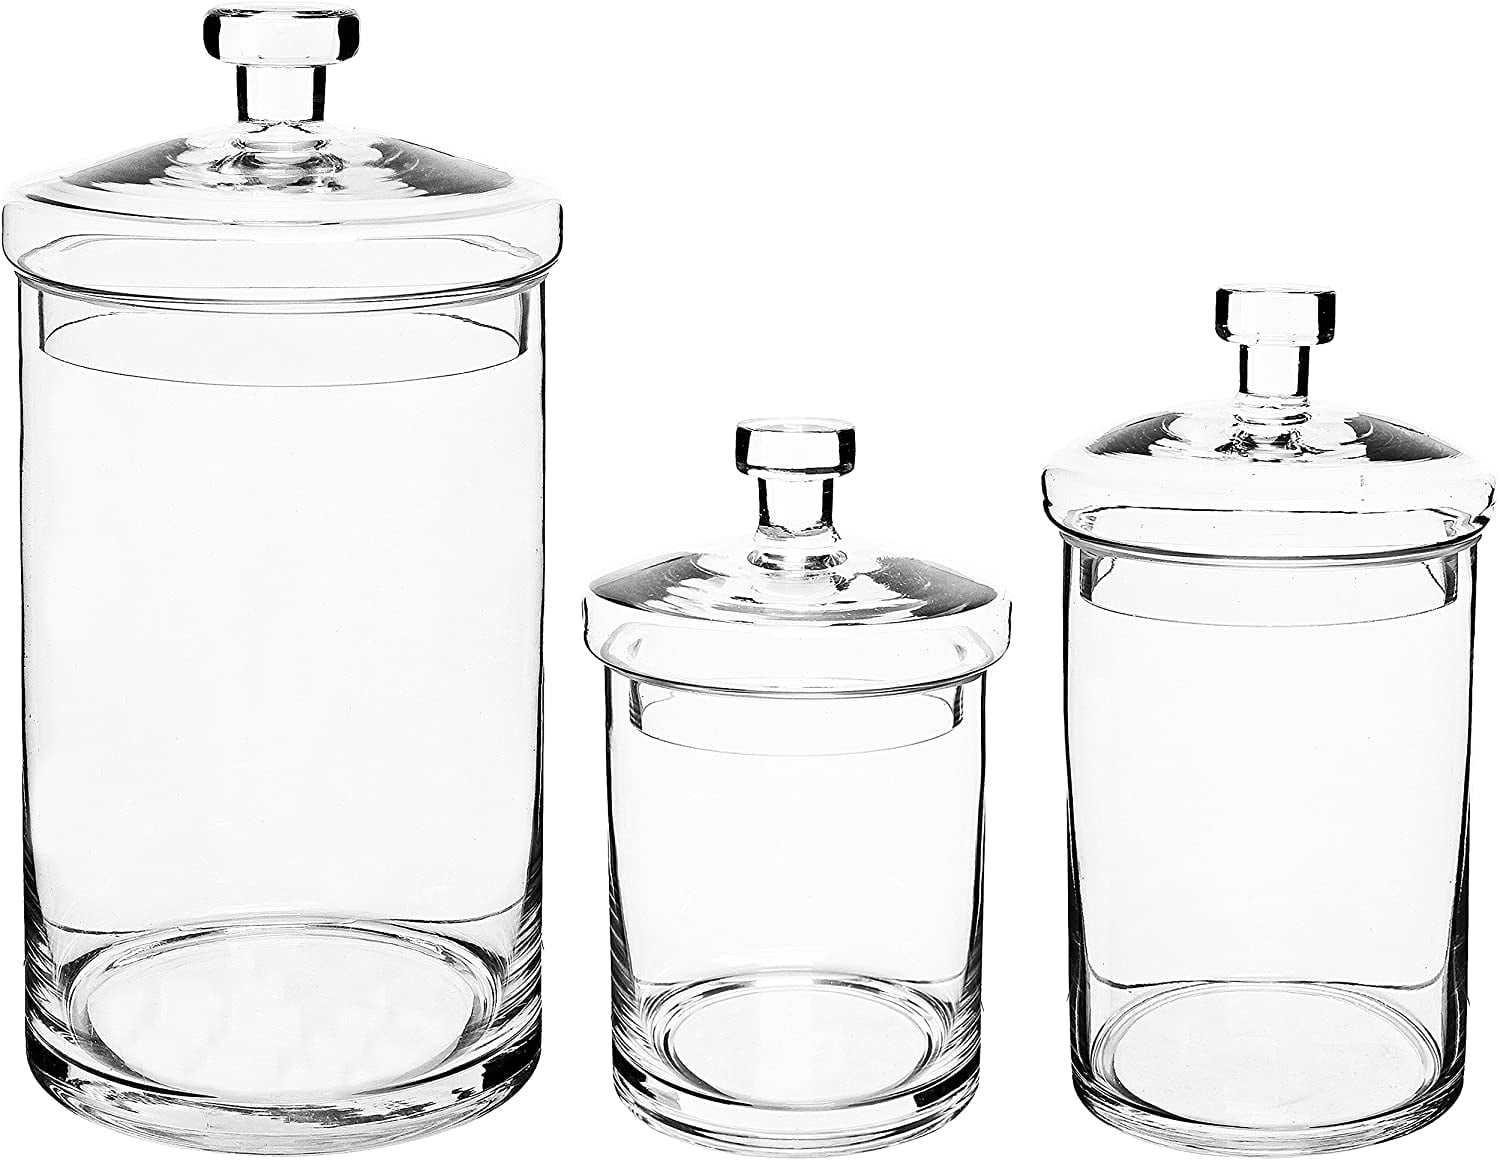 GADGETWIZ Glass Cookie Jar - Glass Apothecary Jars With Lids - Canister  Sets For Kitchen Counter - Glass Candy Jars - Glass Canisters Set Of 3 -  Sugar